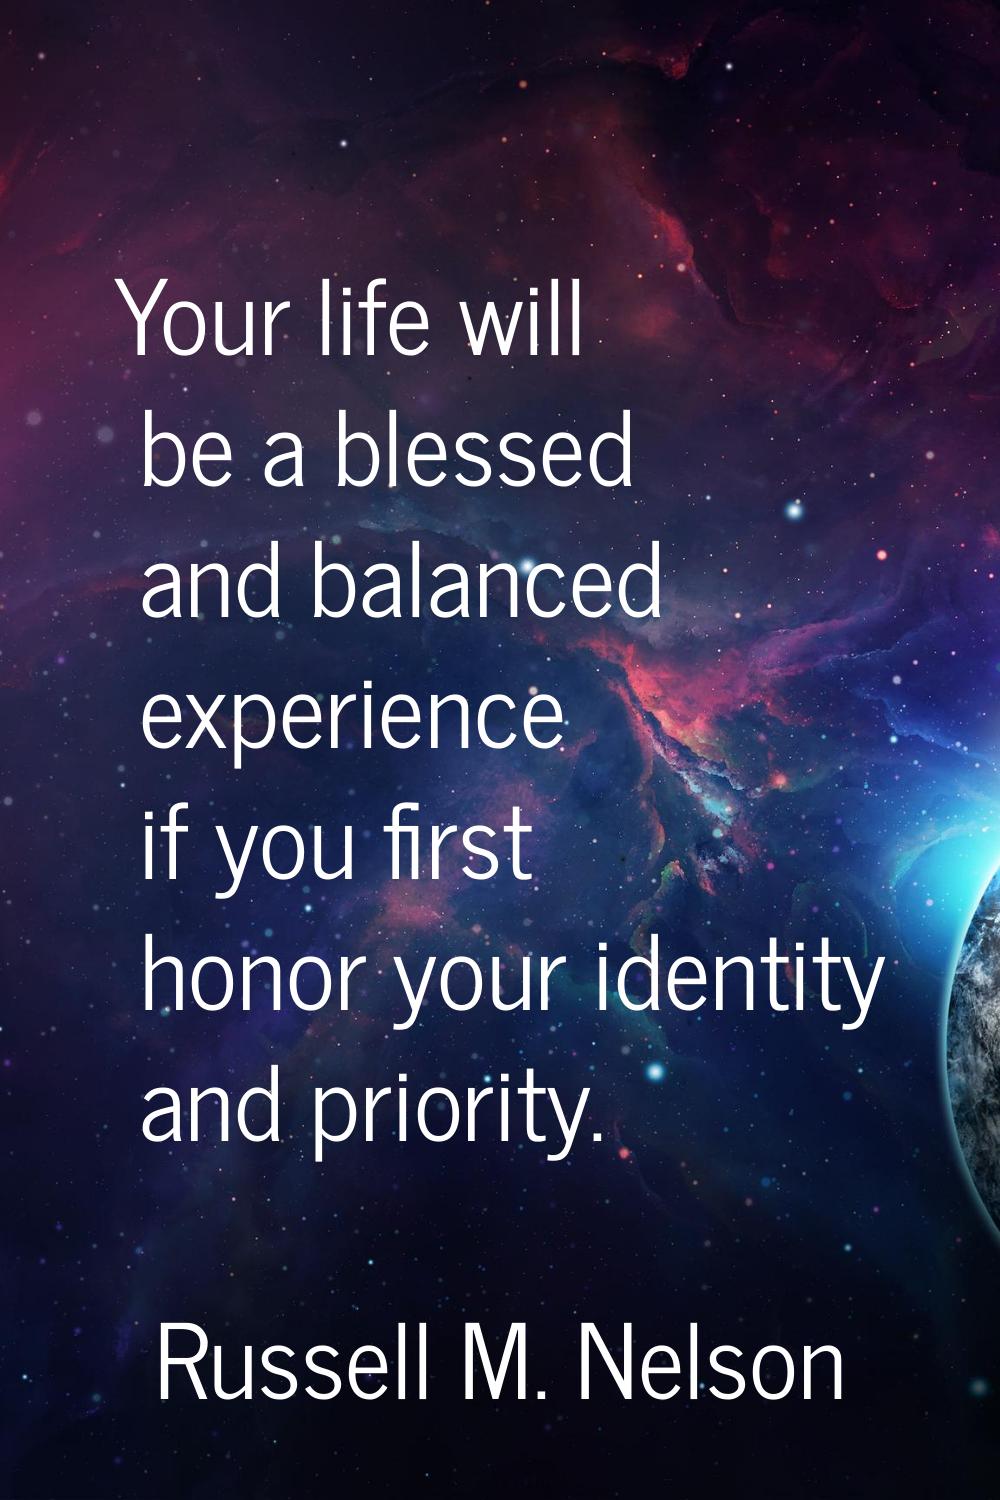 Your life will be a blessed and balanced experience if you first honor your identity and priority.